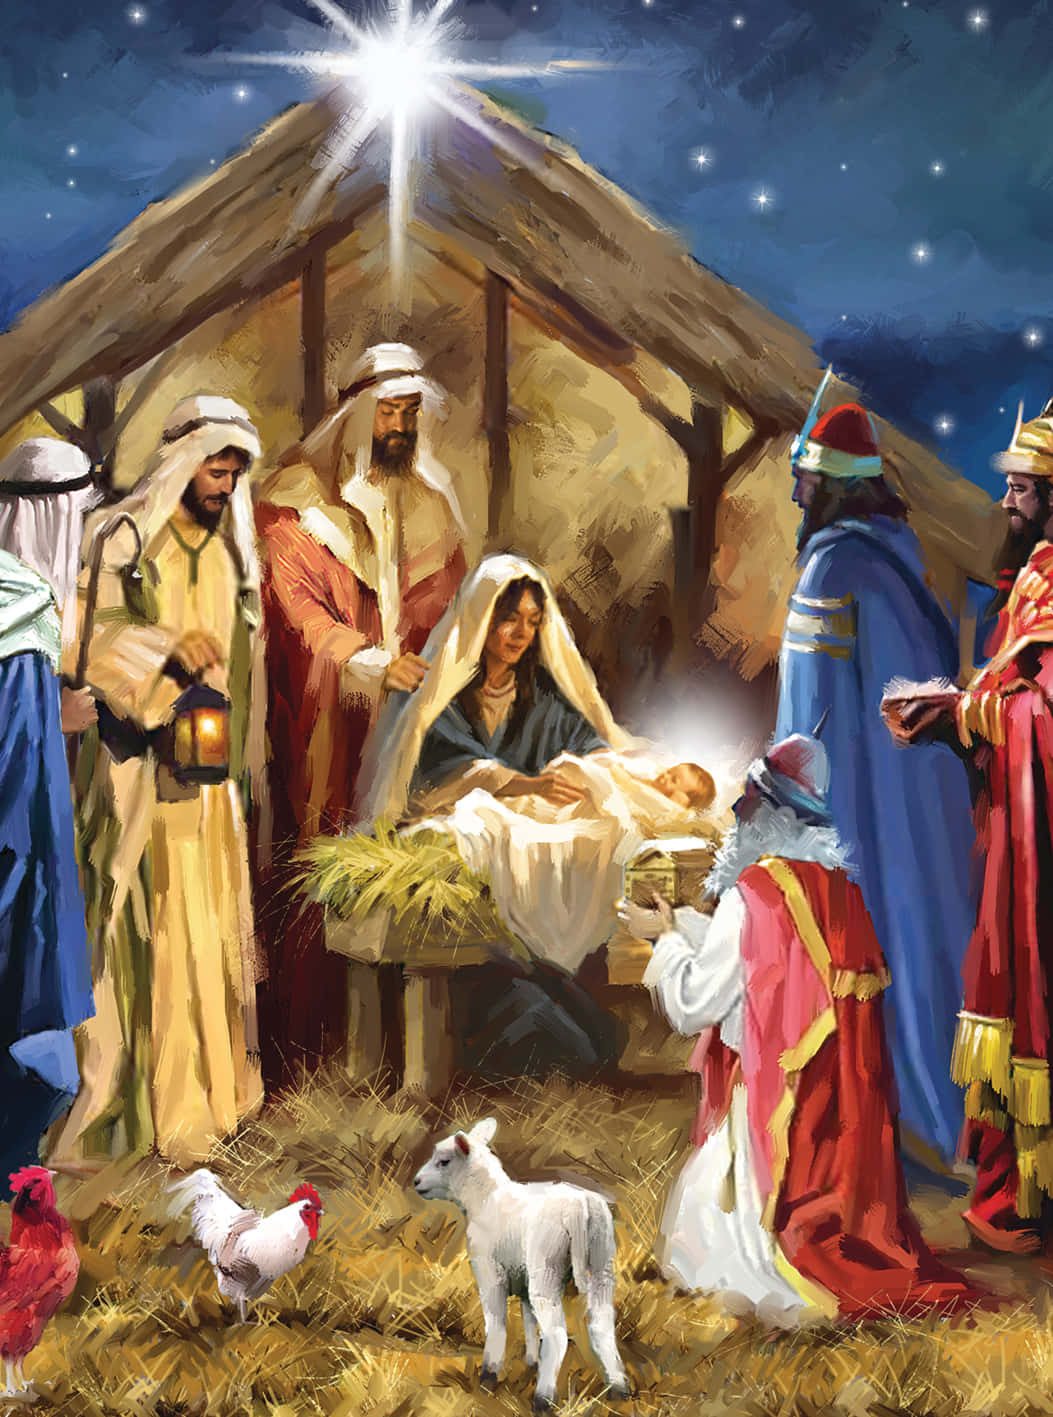 [100+] Nativity Pictures | Wallpapers.com